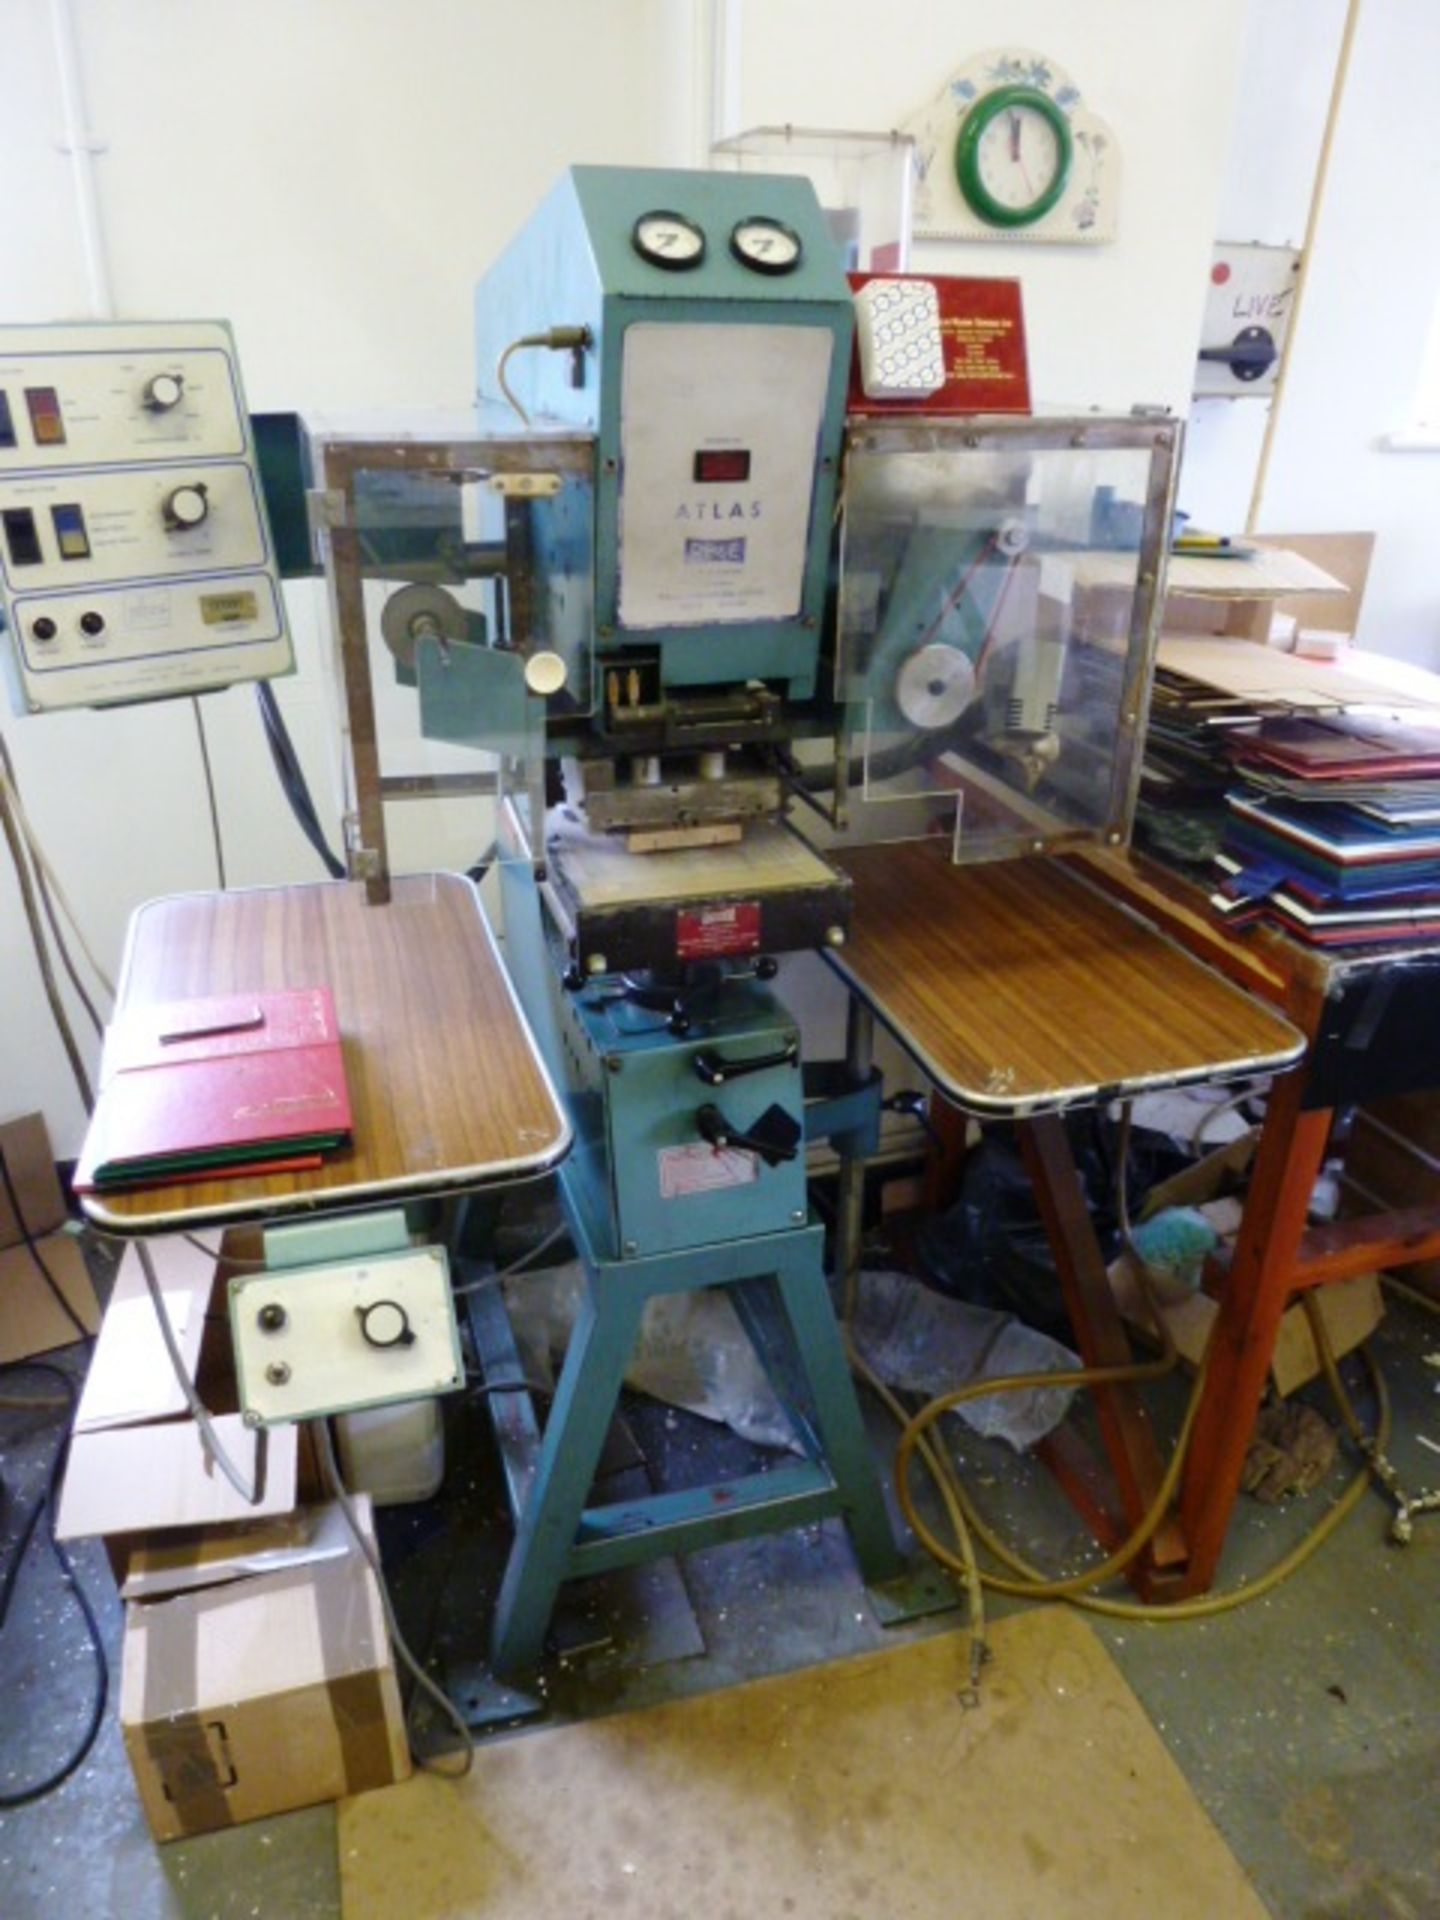 P.B & E ATLAS. Age 1979, Foil Embossing Machine, Semi automatic hand-fed machine for foil or blind